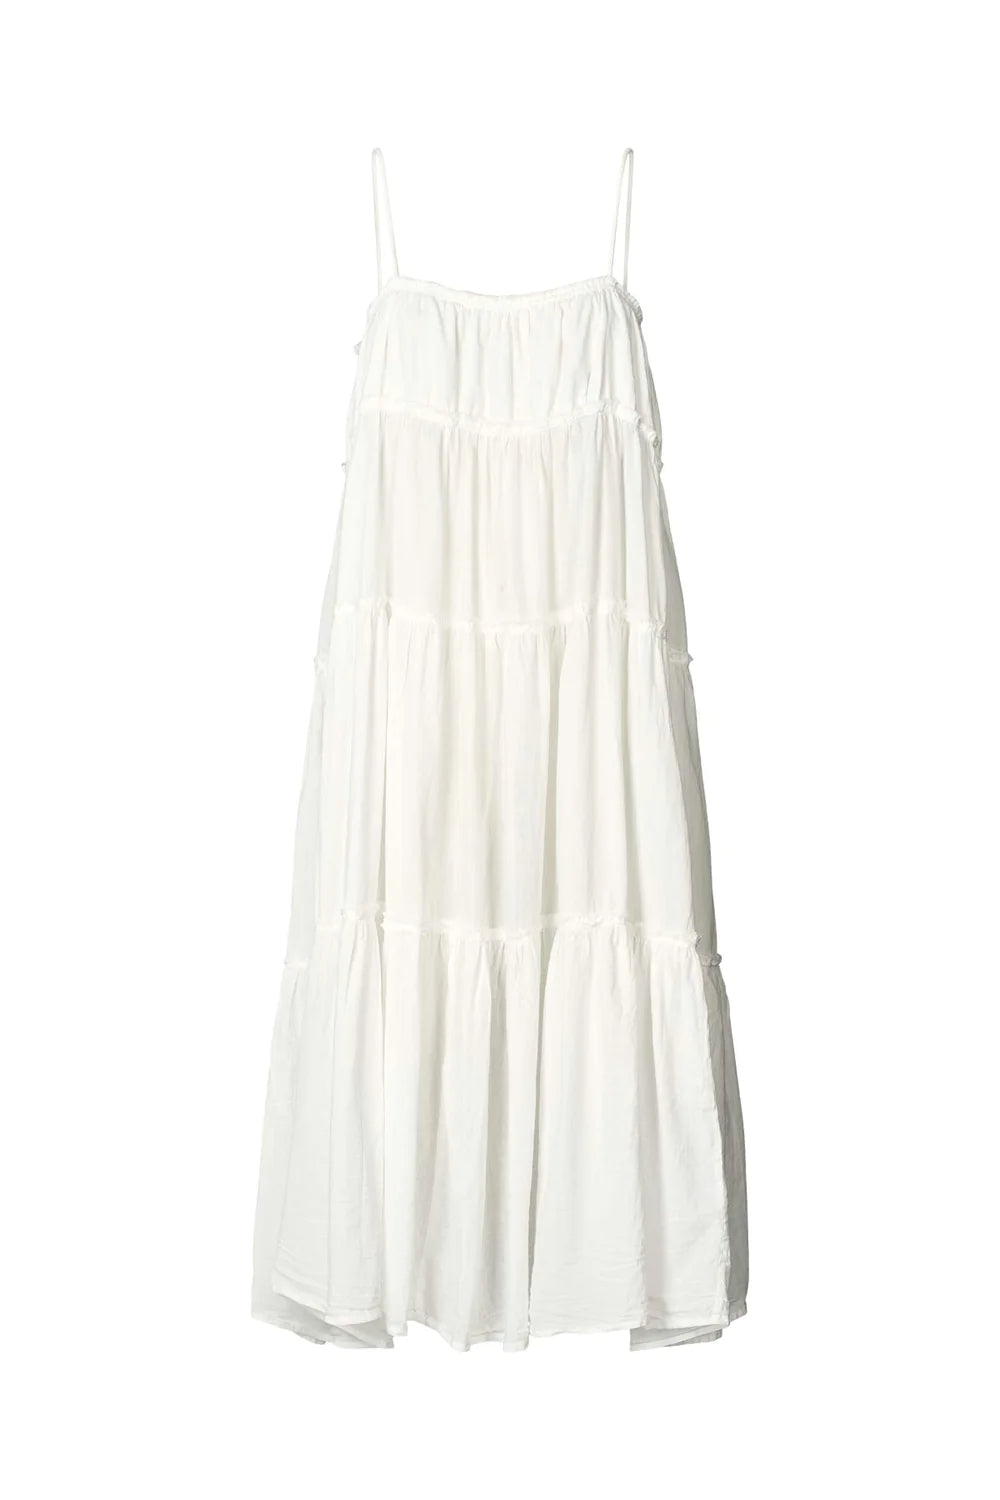 Cotton string dress juvel in white by Rabens Saloner